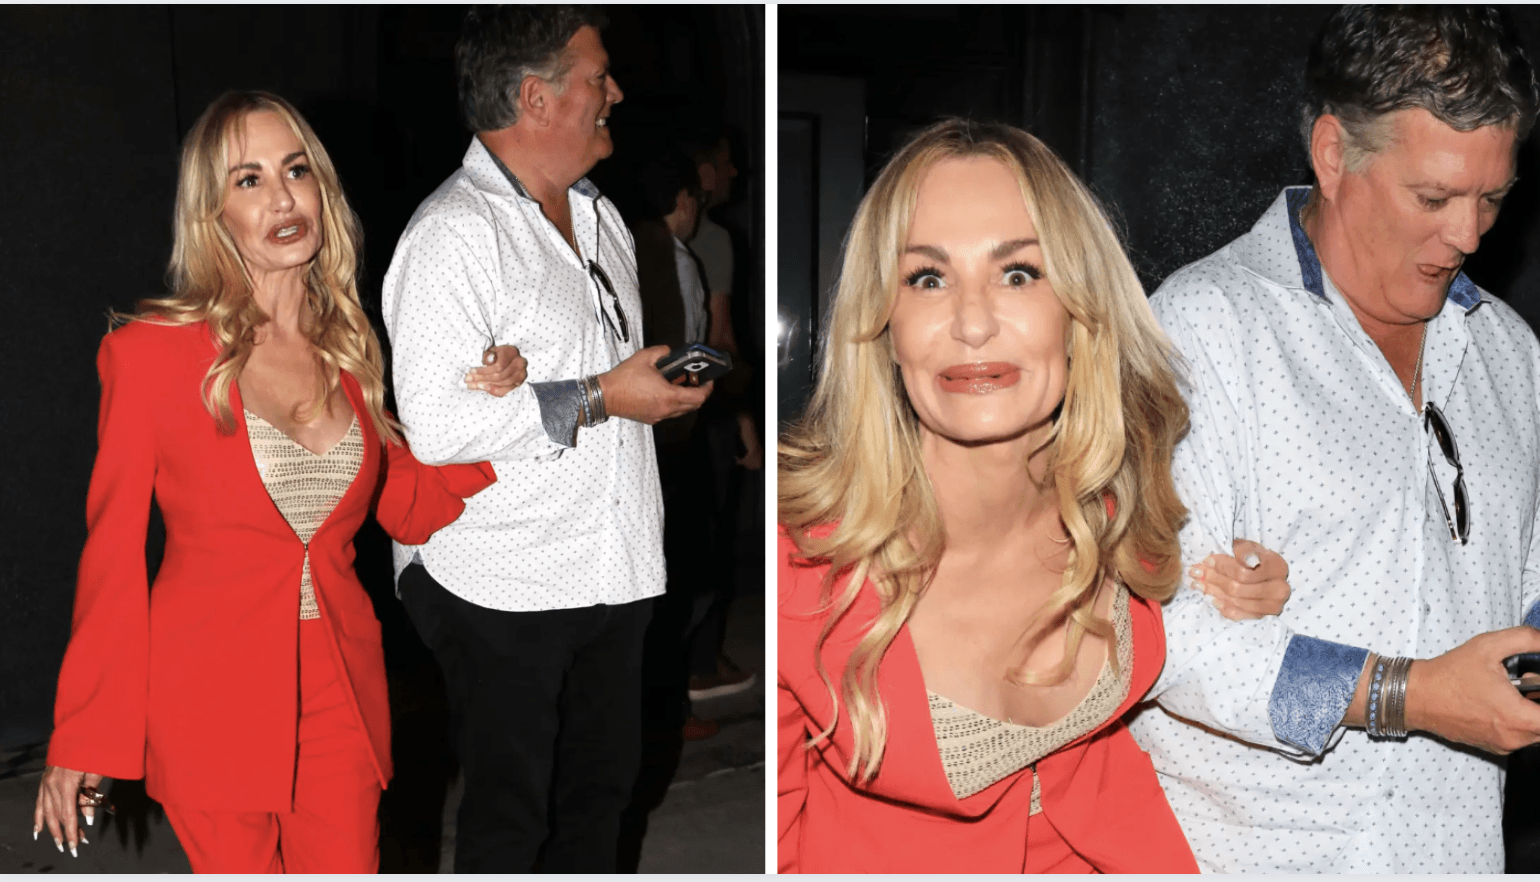 ‘RHOC’ Star Taylor Armstrong Appears HIGH on Drugs Outside Celeb Hotspot, Rambles About Reunion!